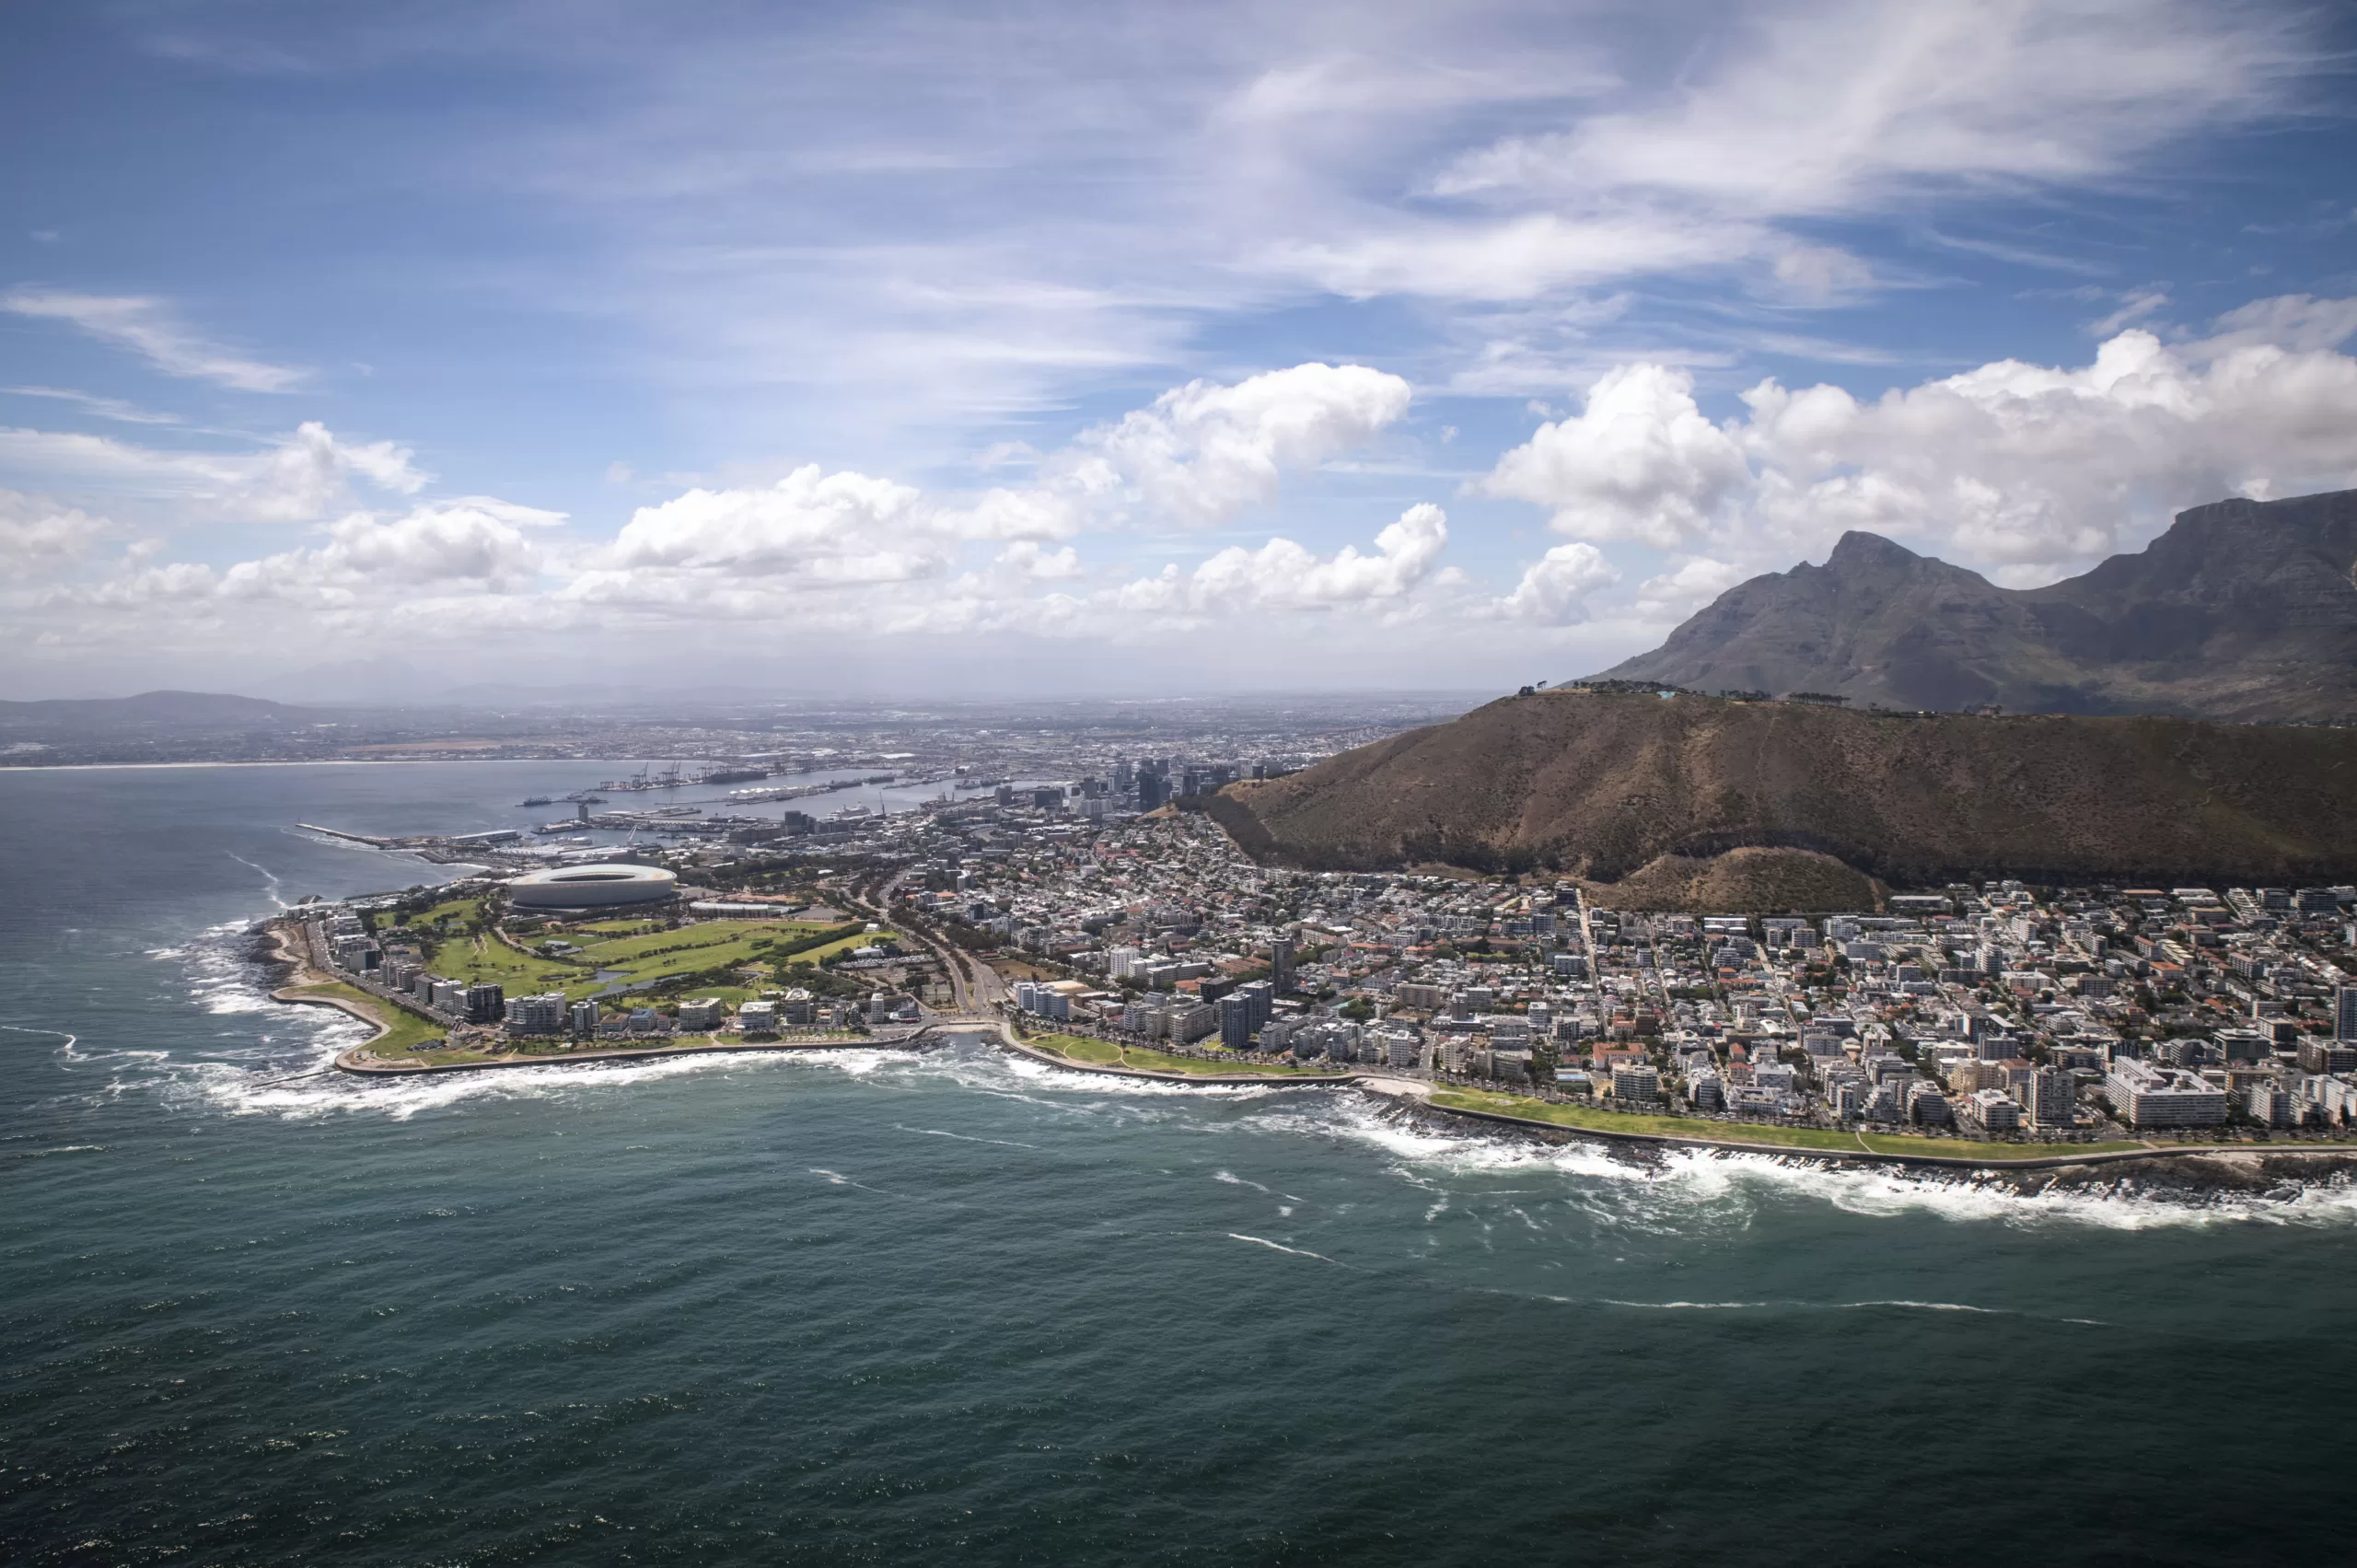 Cape Town, South Africa
Photo by Riccardo Lopez